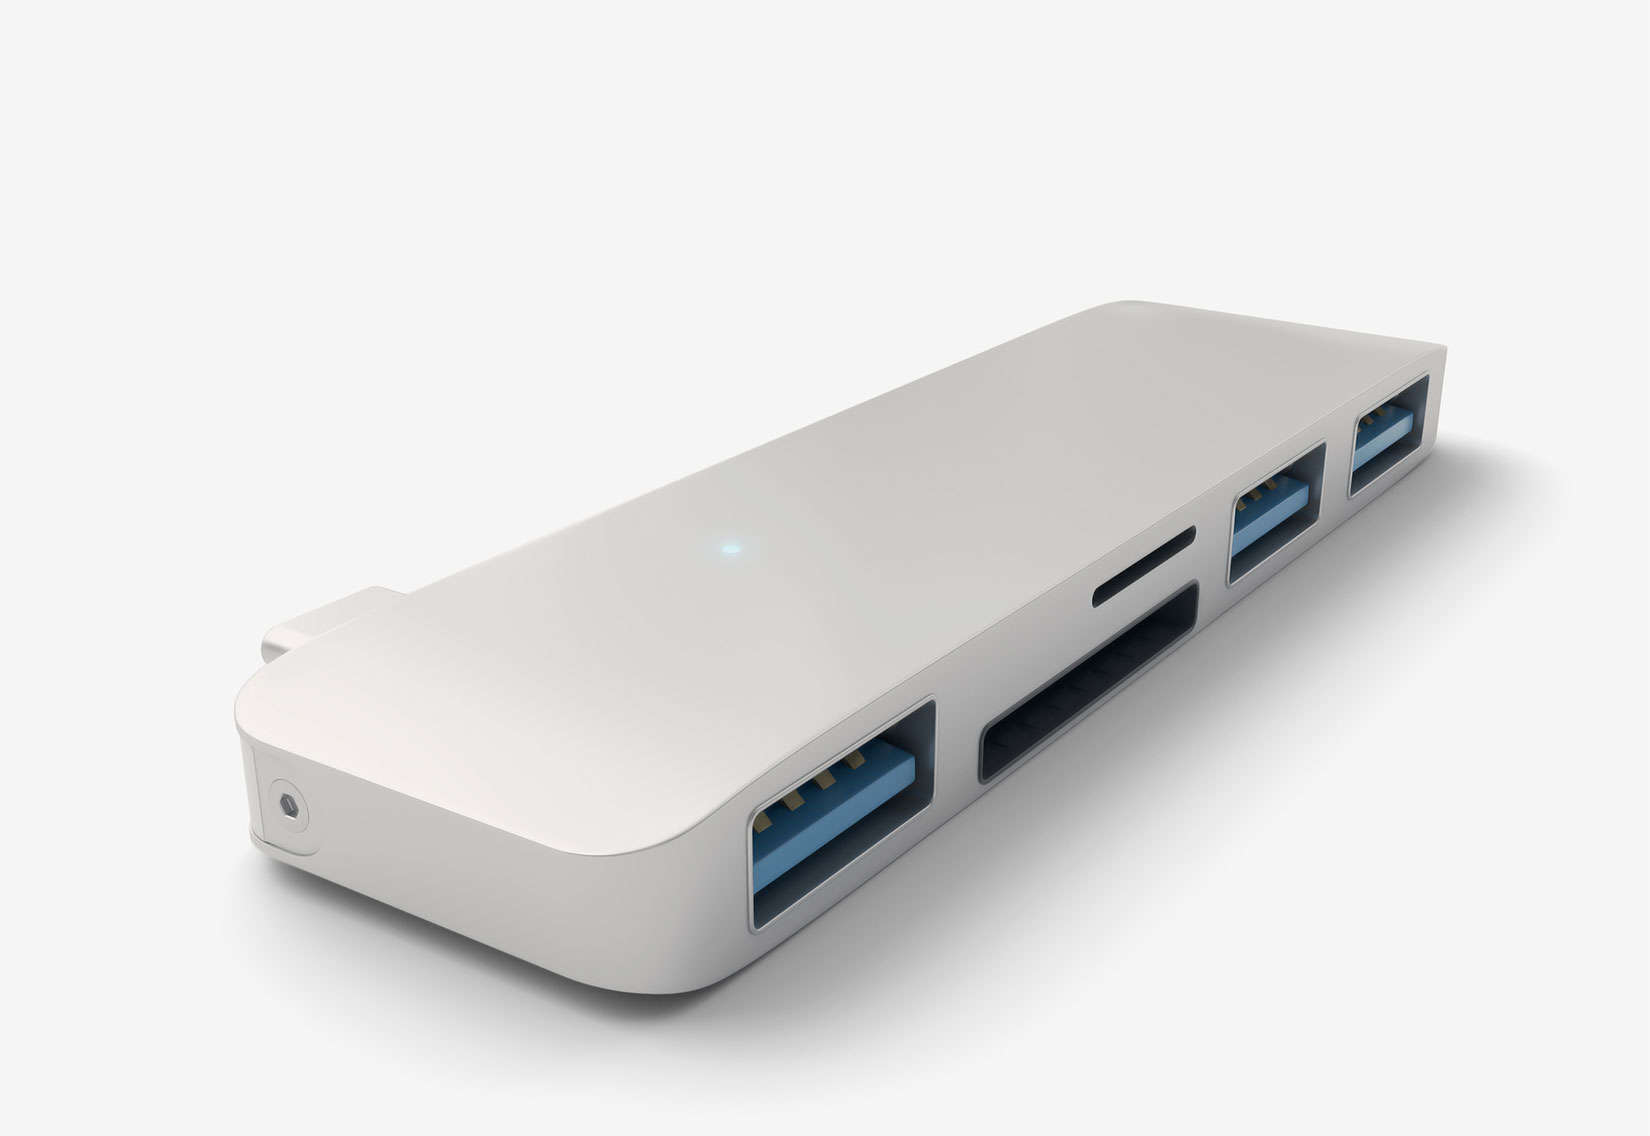 Media card slots and three A-type USB ports make Satechi's Type-C Hub Adapter a workhorse.